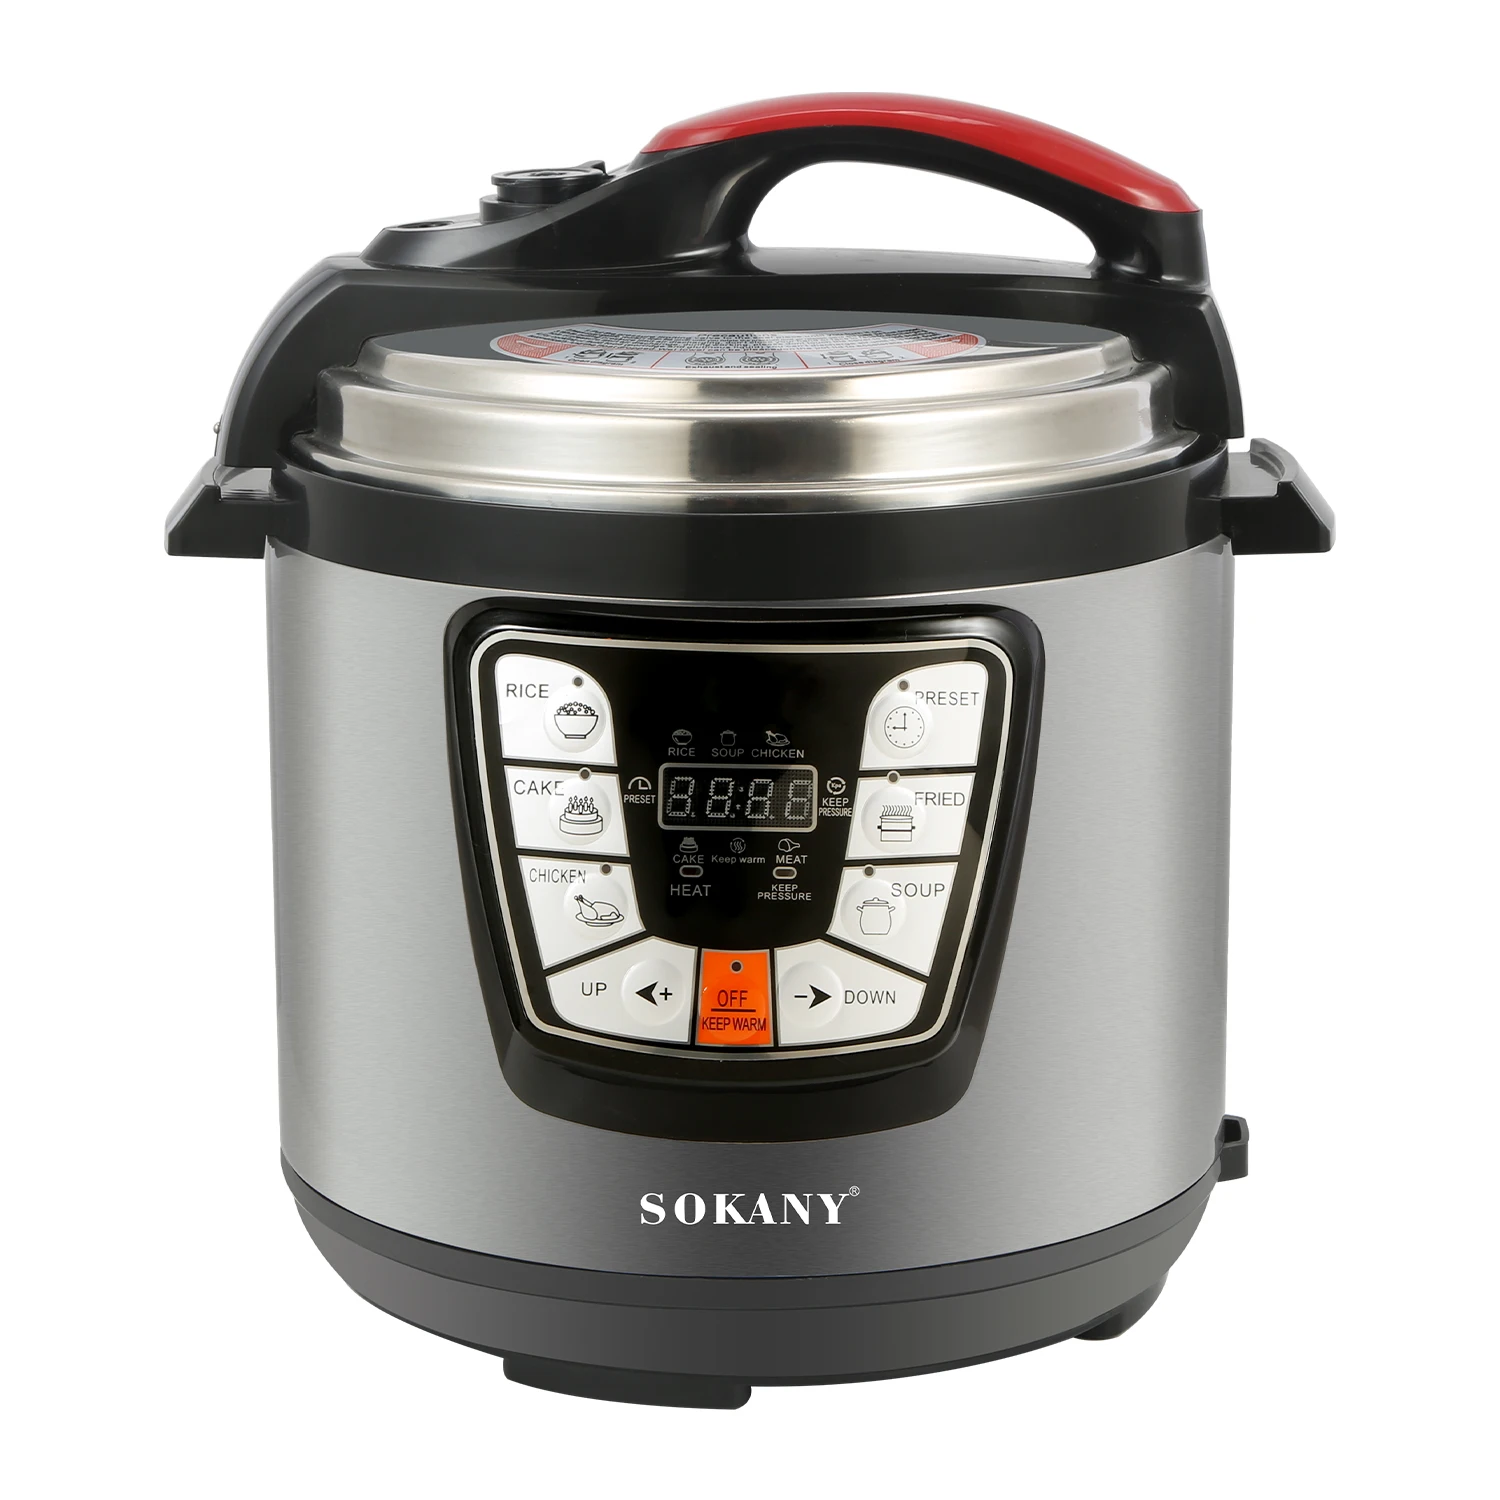 Sokany2401 High Quality Household Electric Pressure Cooker Stainless ...